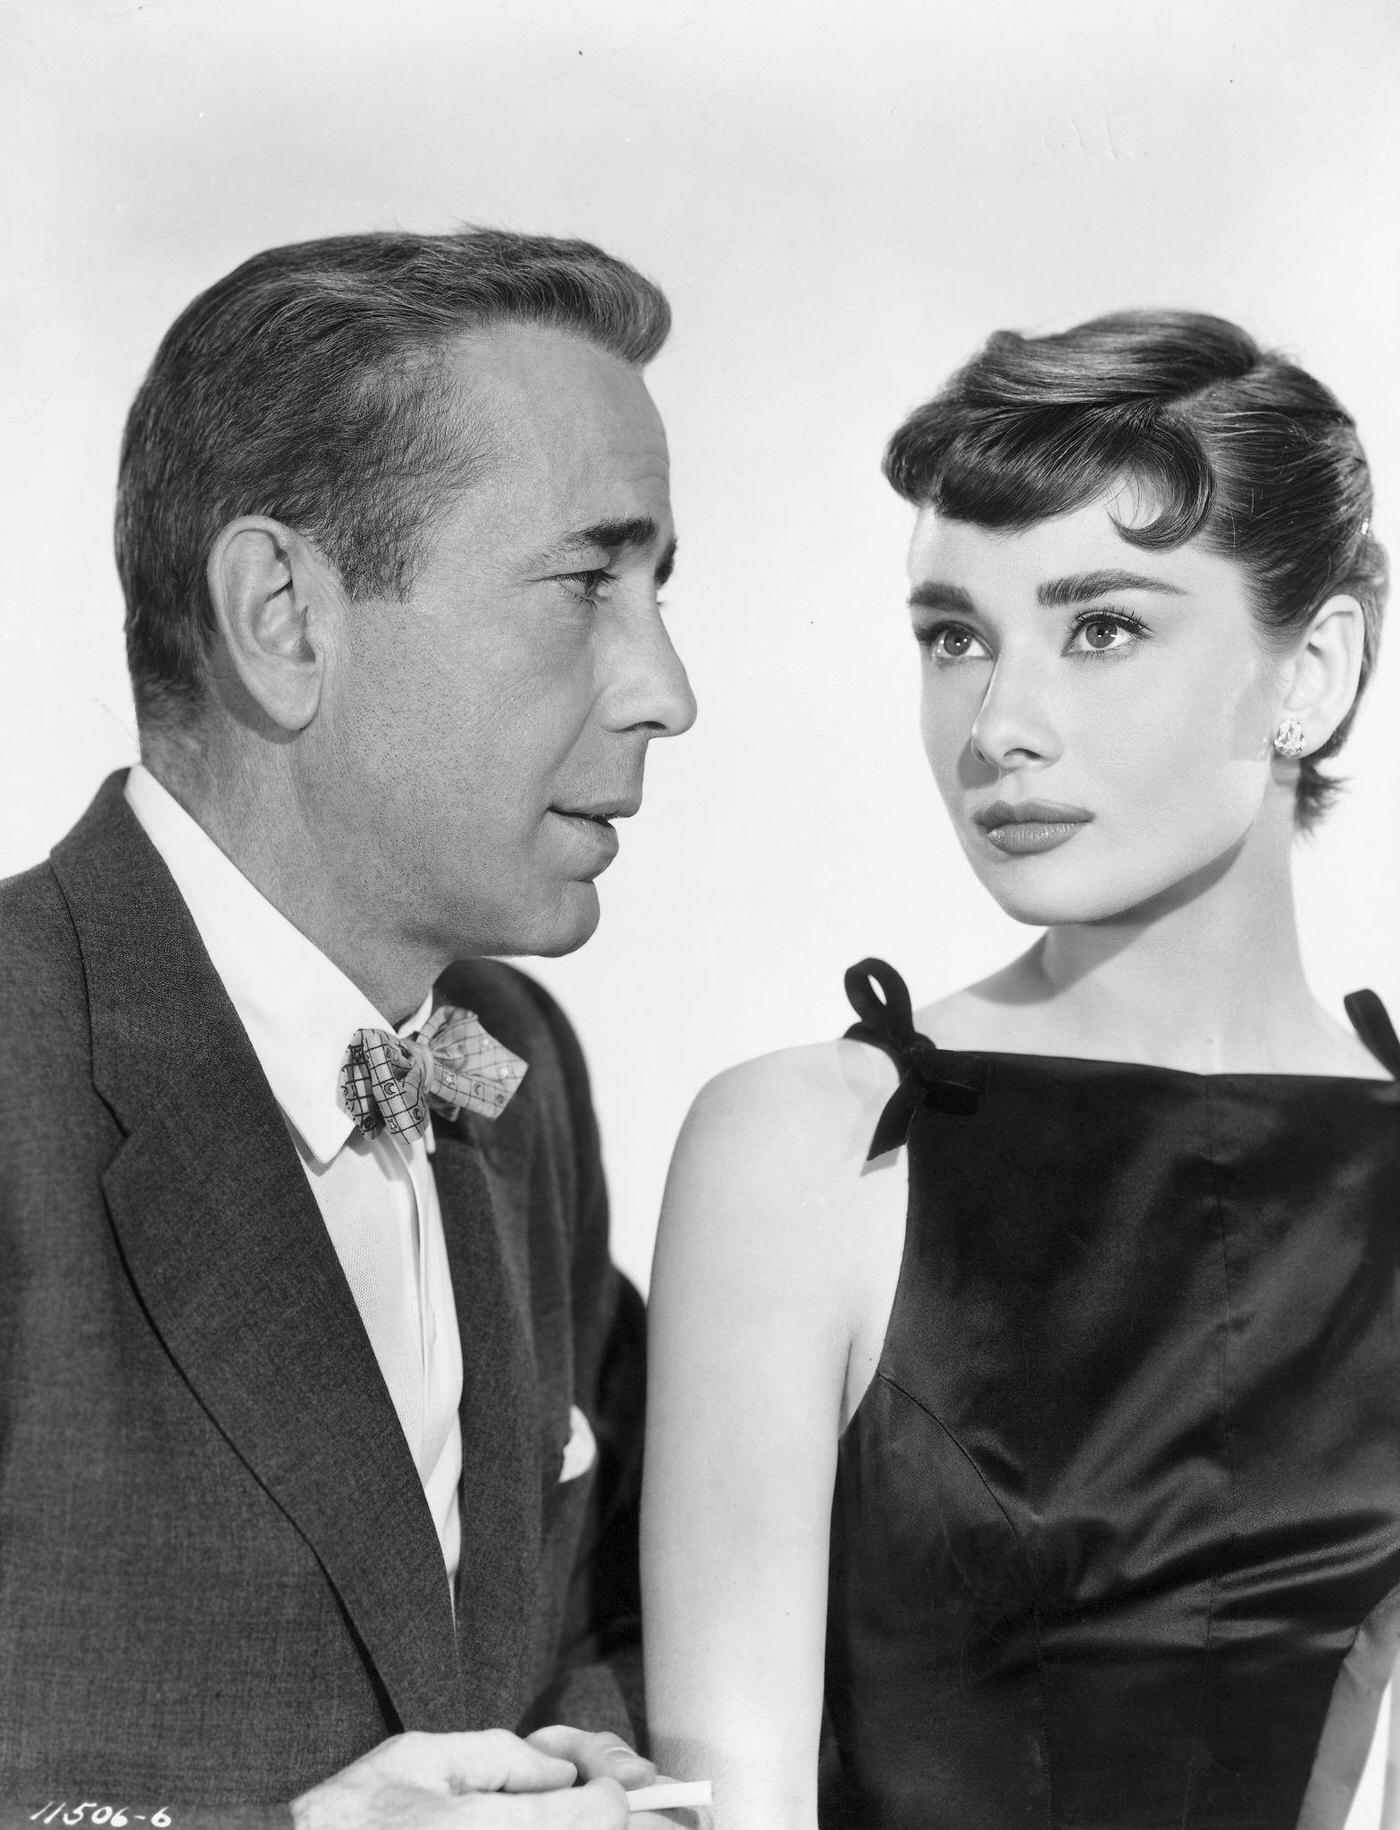 Humphrey Bogart: A Glance at the Life of a Hollywood Icon